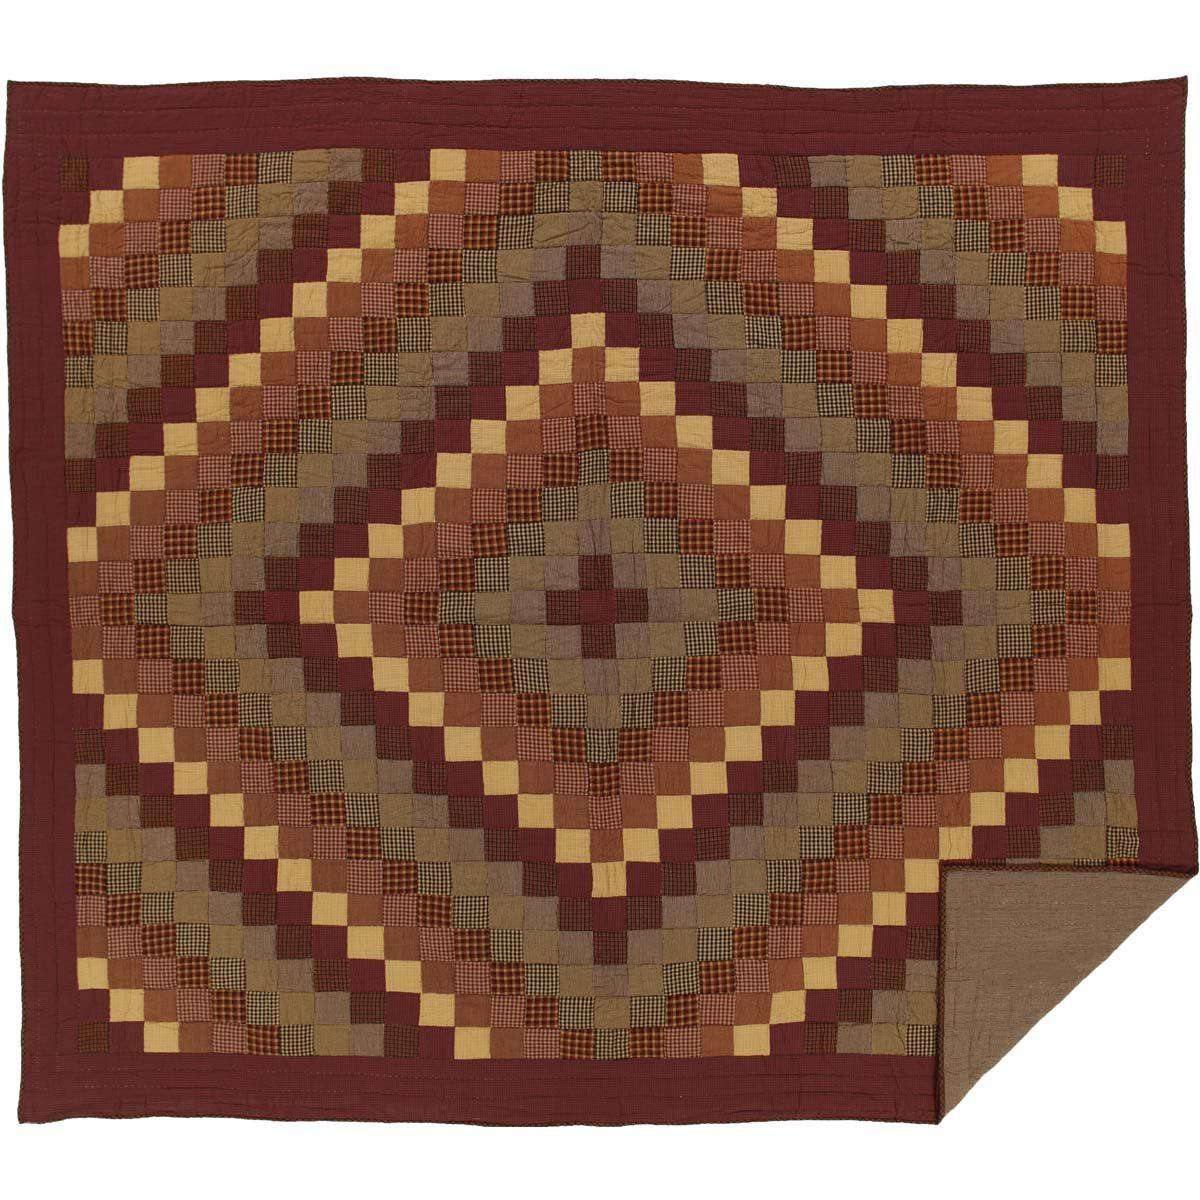 Heritage Farms California King Quilt 130Wx115L VHC Brands full